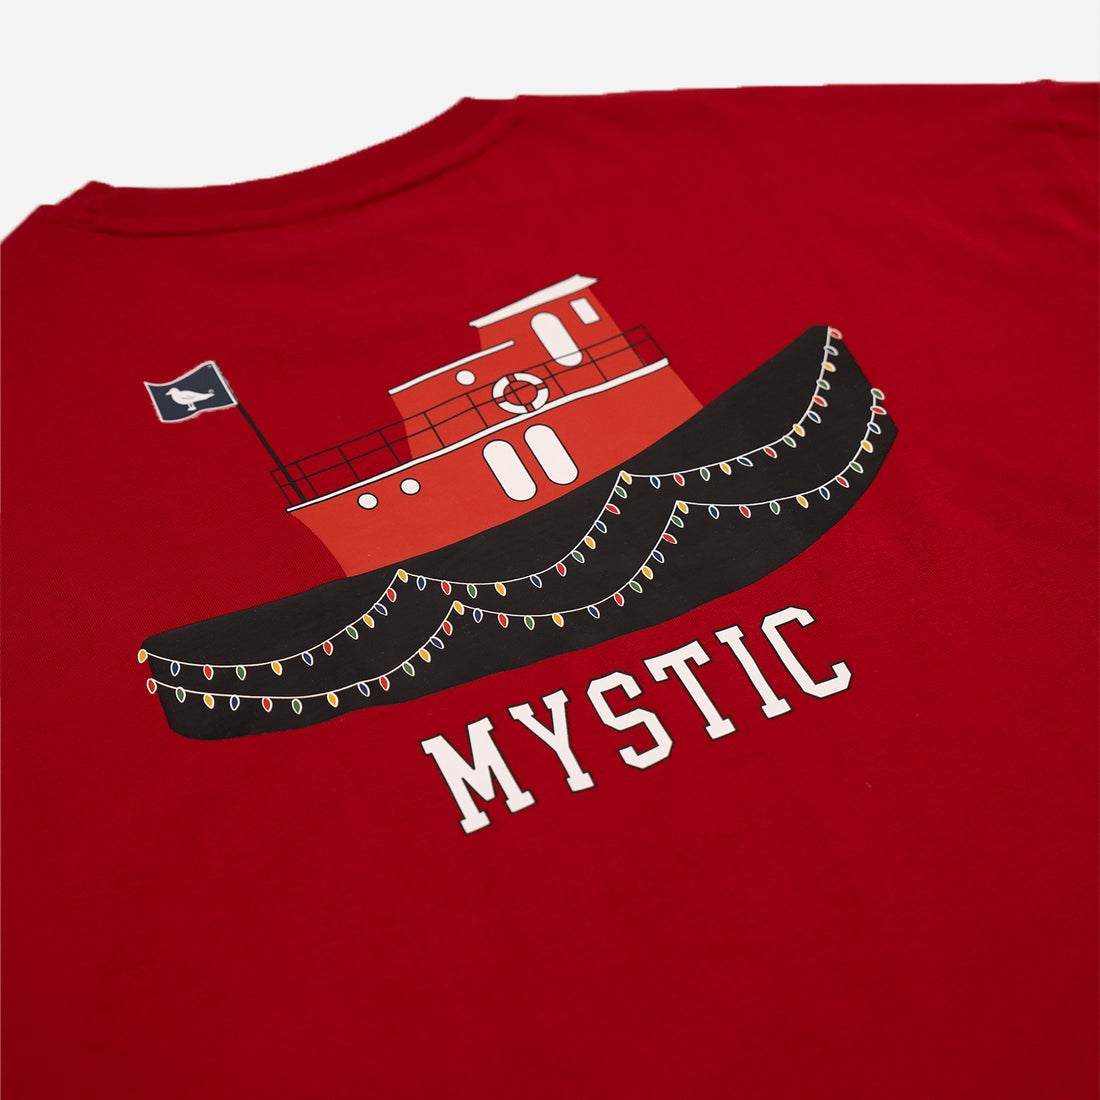 *LIMITED* Mystic Tugboat Holiday Long-Sleeve T-Shirt